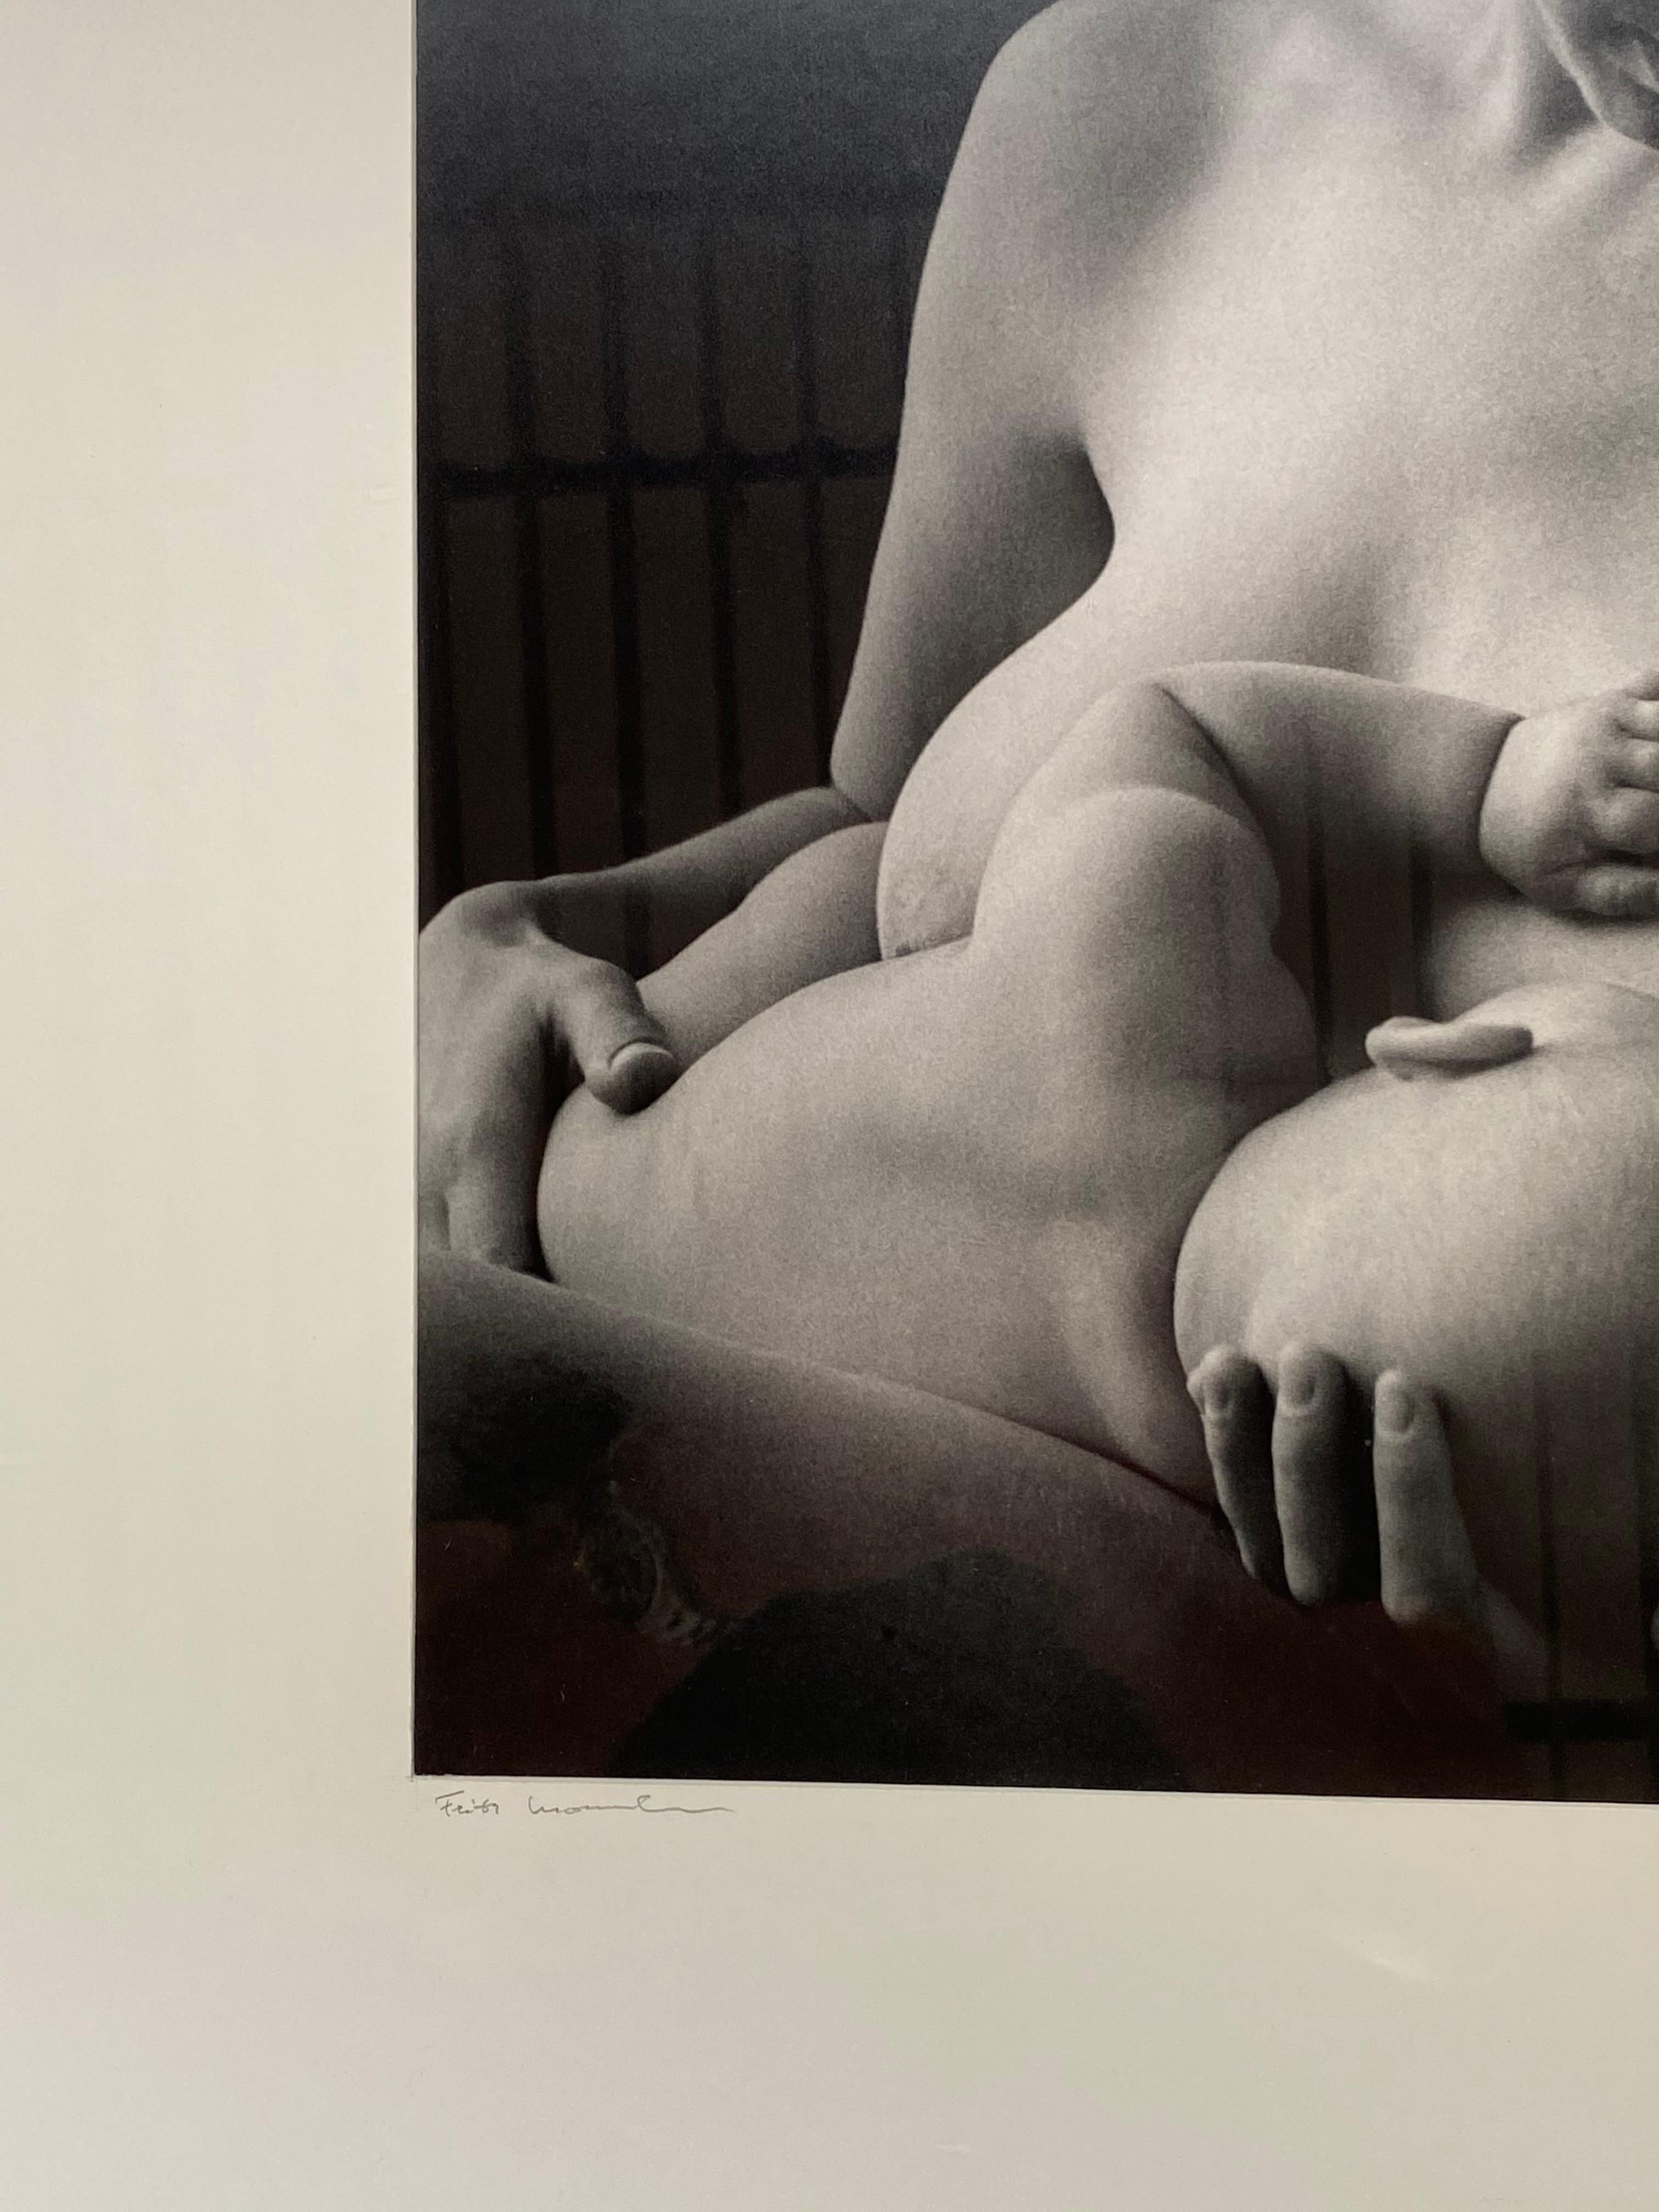 Fritz monshouwer Mother and child 1986 - Gray Black and White Photograph by Fritz Monshouwer